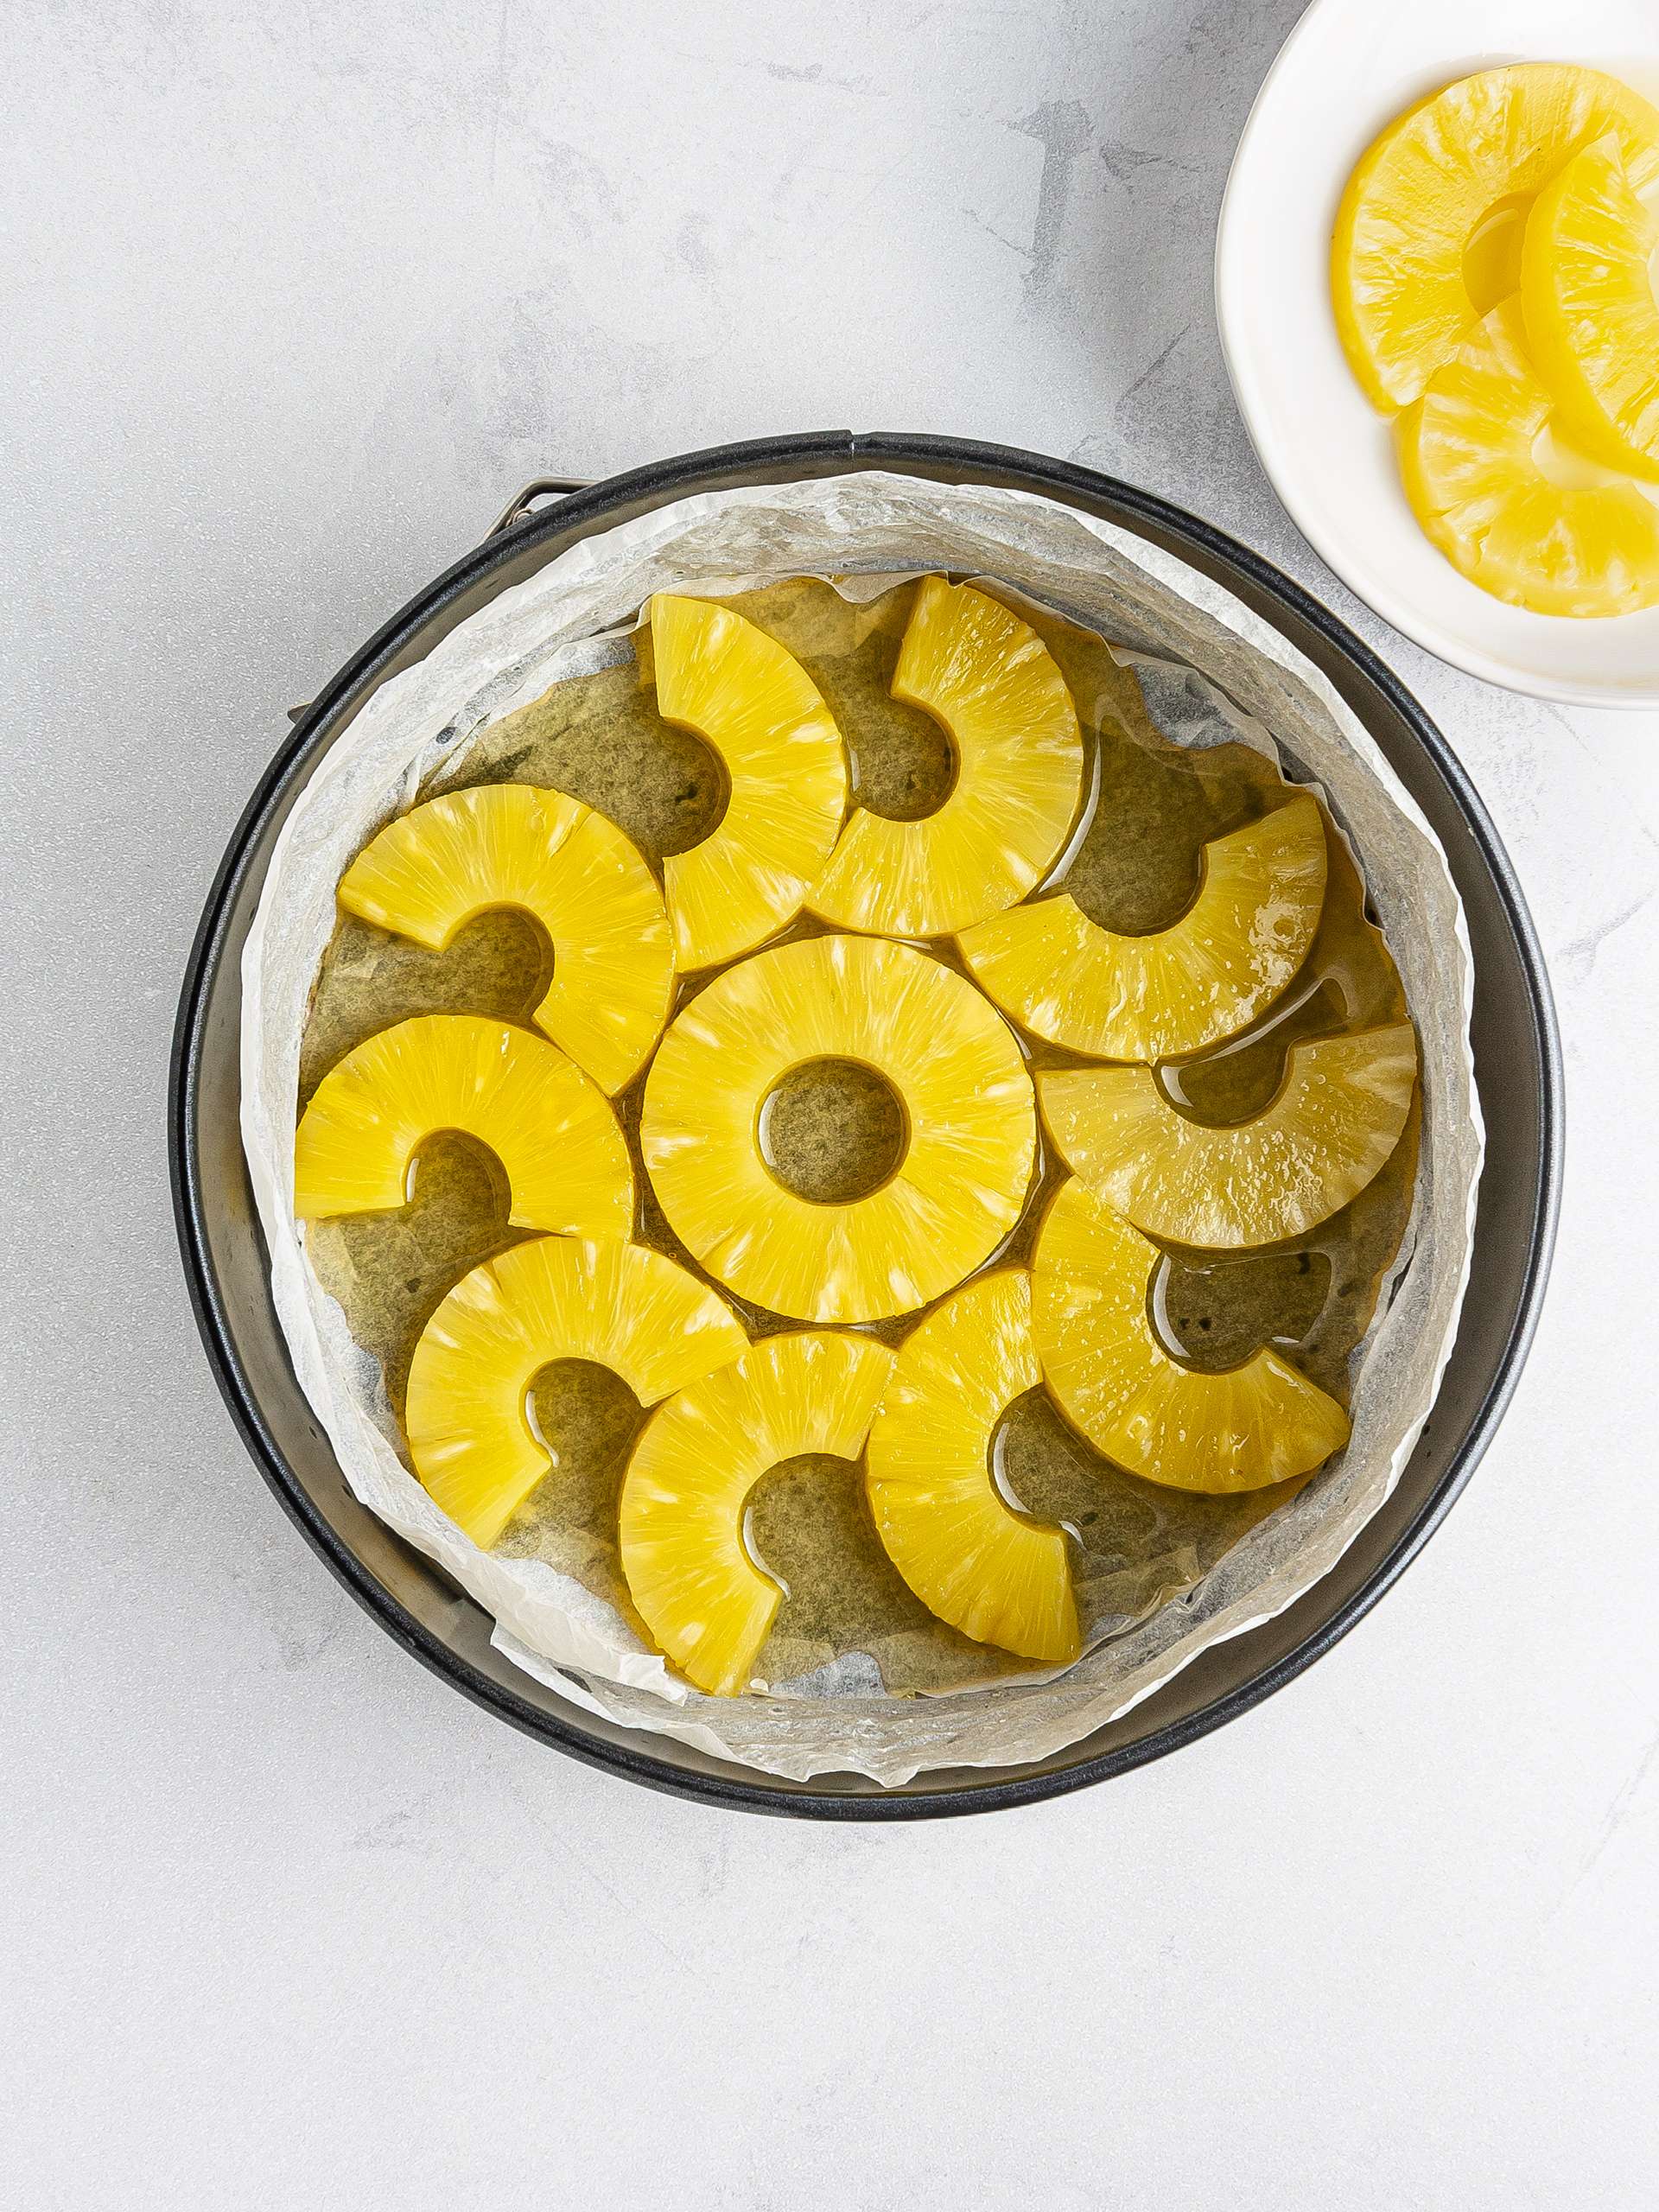 Pineapple slices on the bottom of the baking tin.